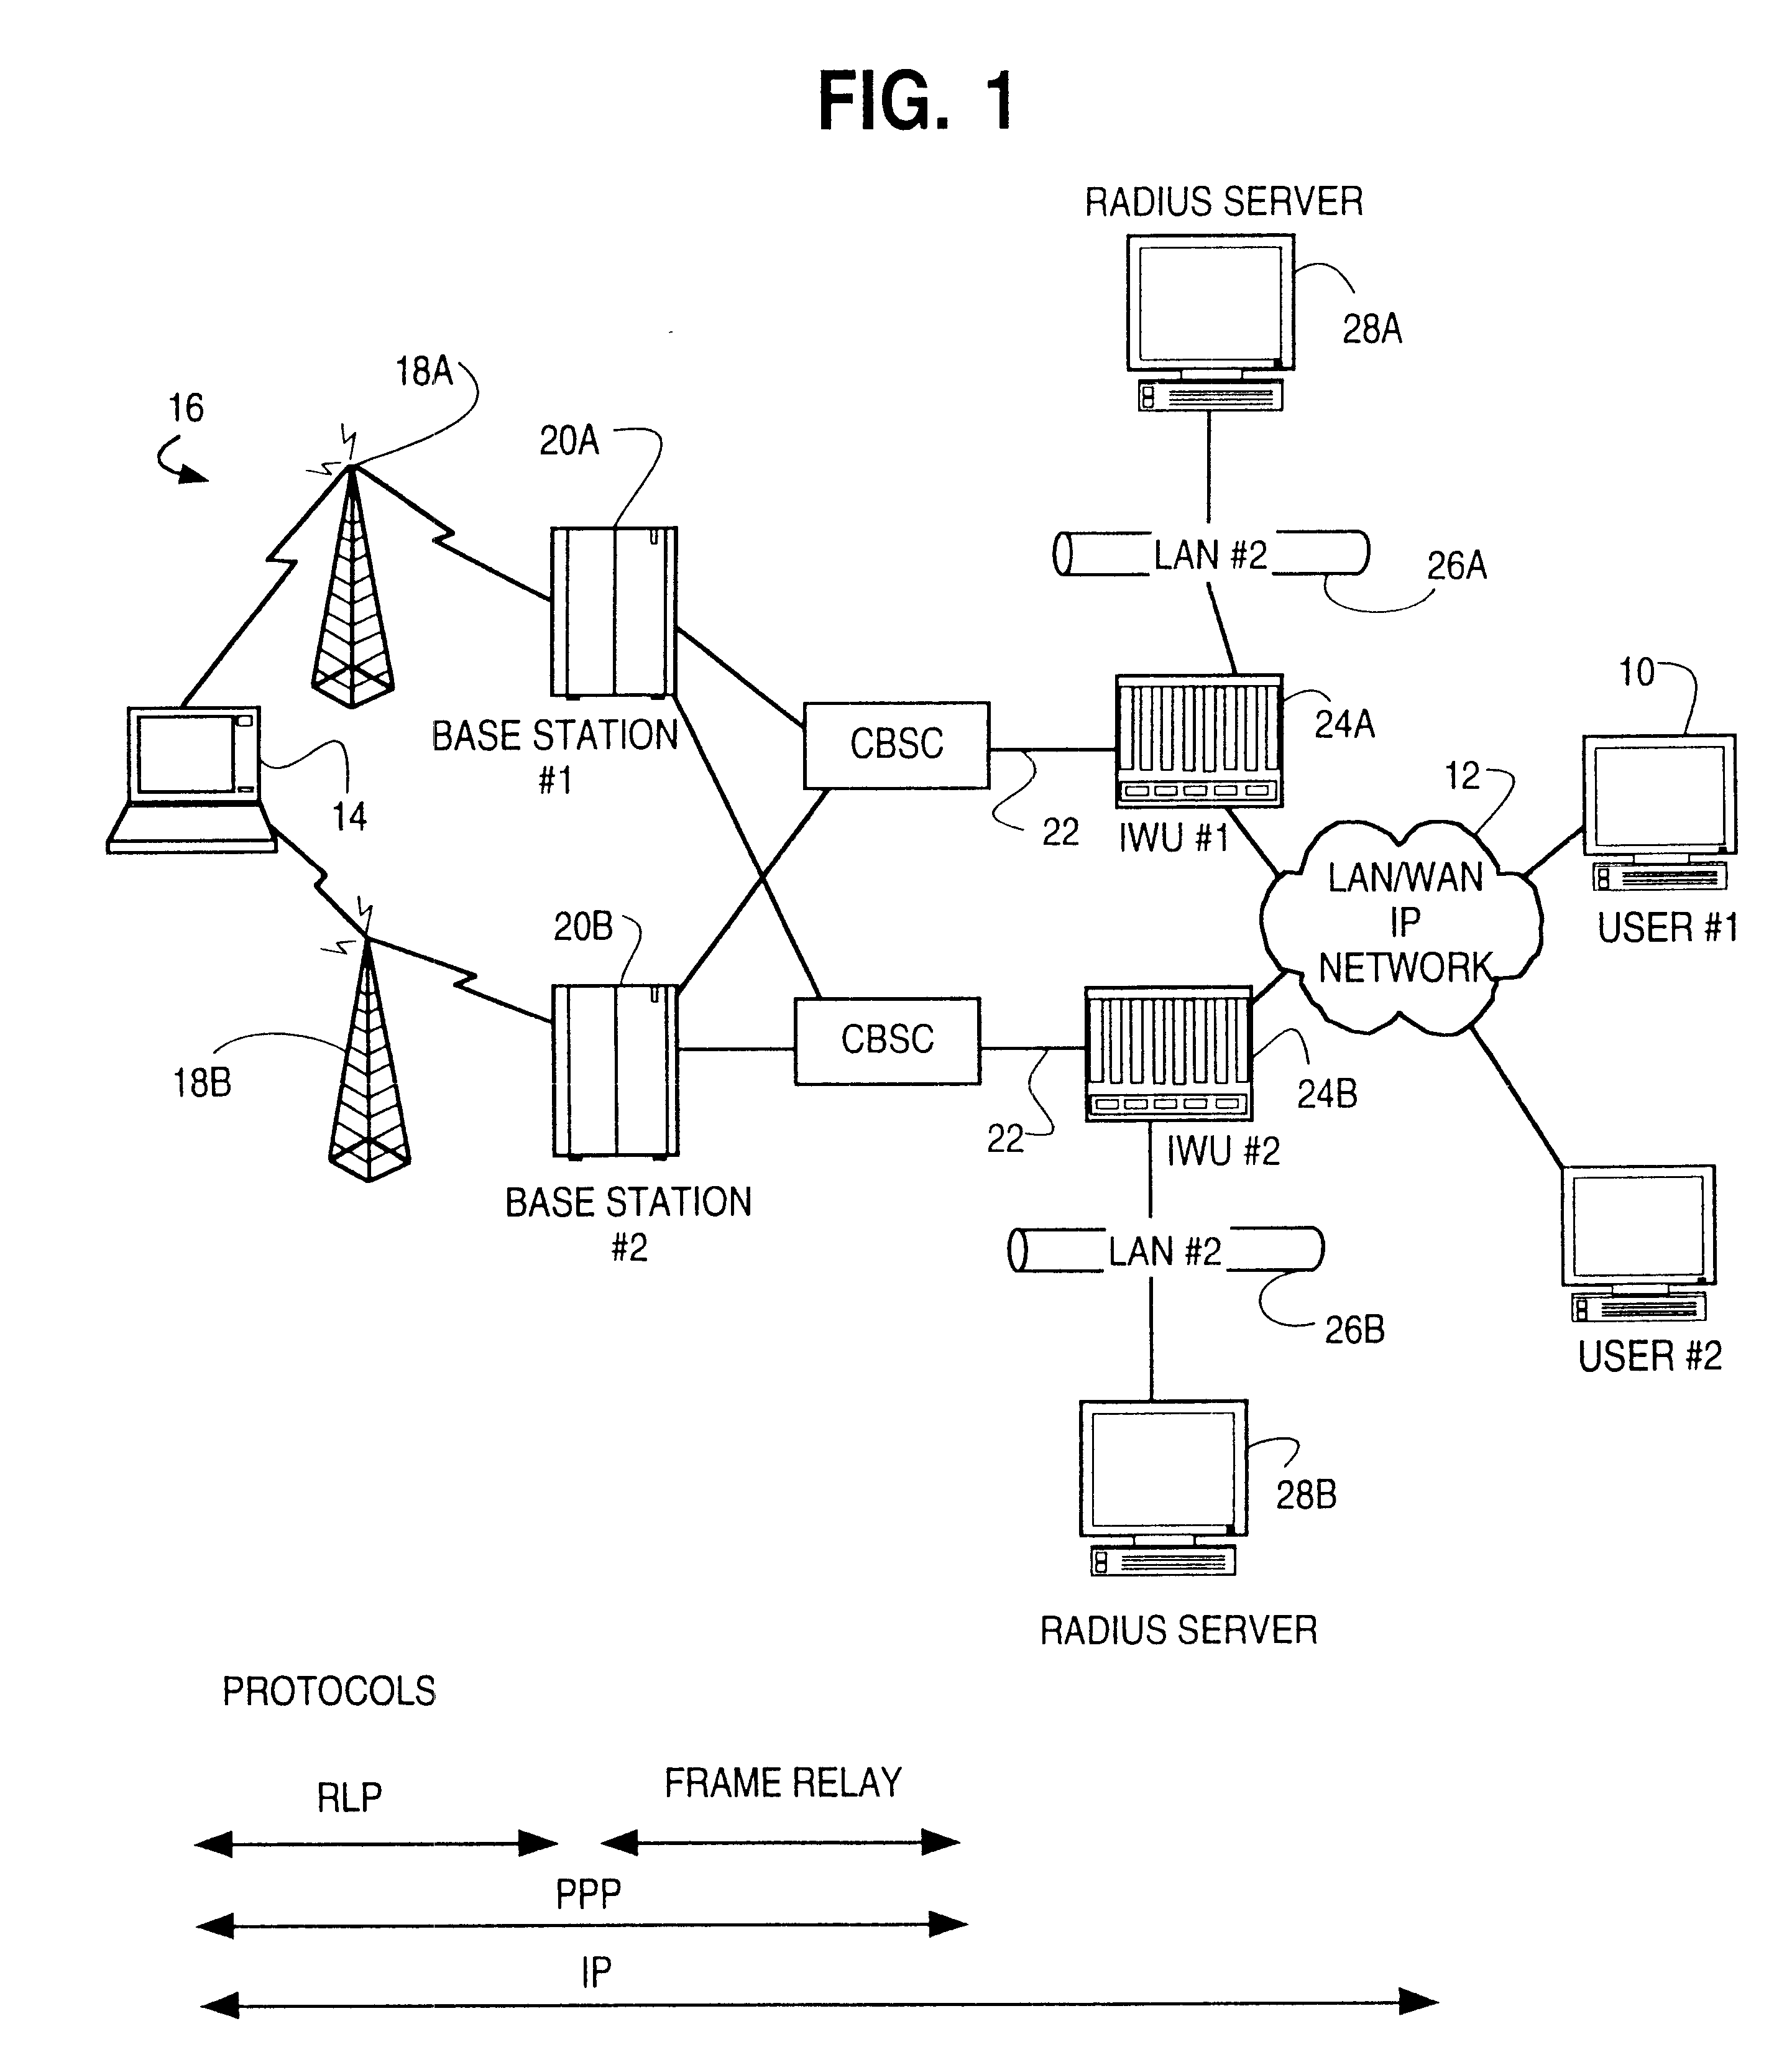 Instant activation of point-to point protocol (PPP) connection using existing PPP state